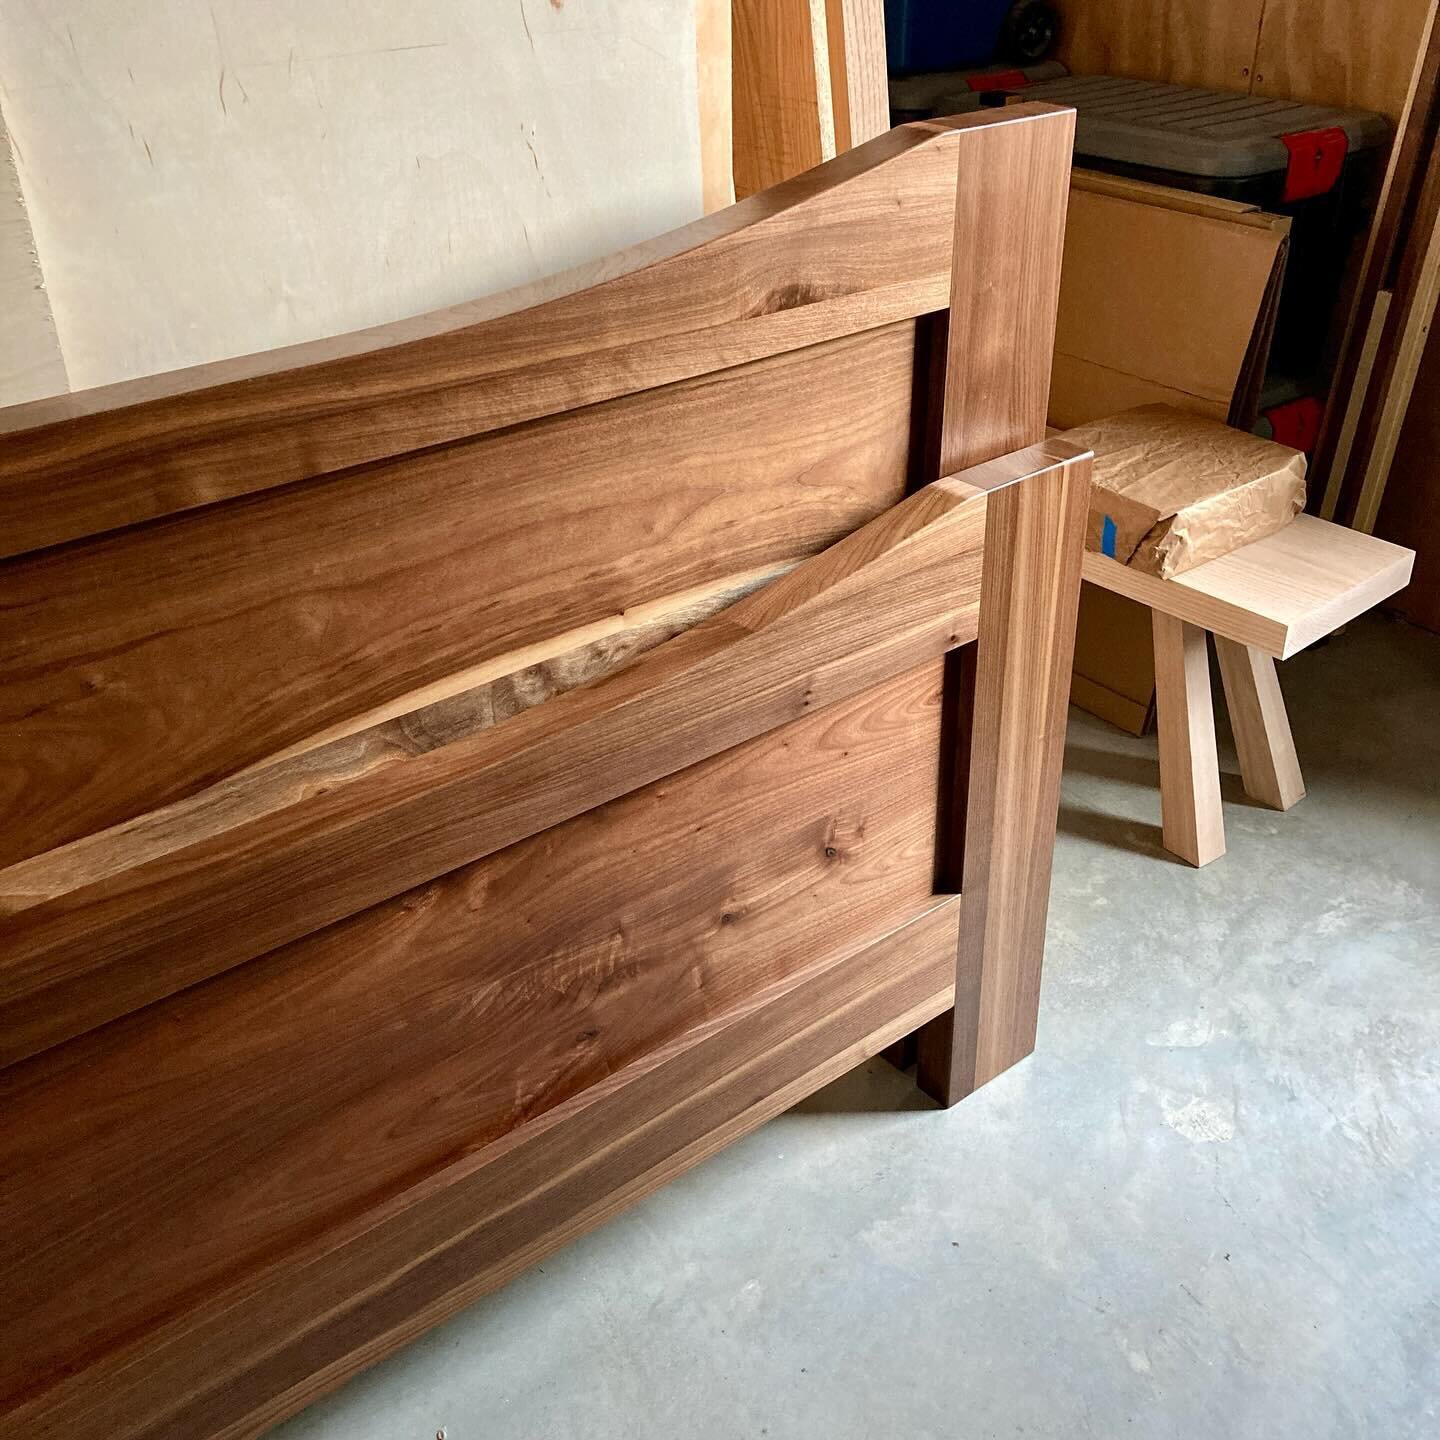 I liked the way morning light hit this almost-finished black walnut bed yesterday. It&rsquo;s too huge for me to get good photos in the shop, but I&rsquo;ll post some more when it&rsquo;s ready to deliver.

.
.
.
#vvfurniture #custombed #customfurnit